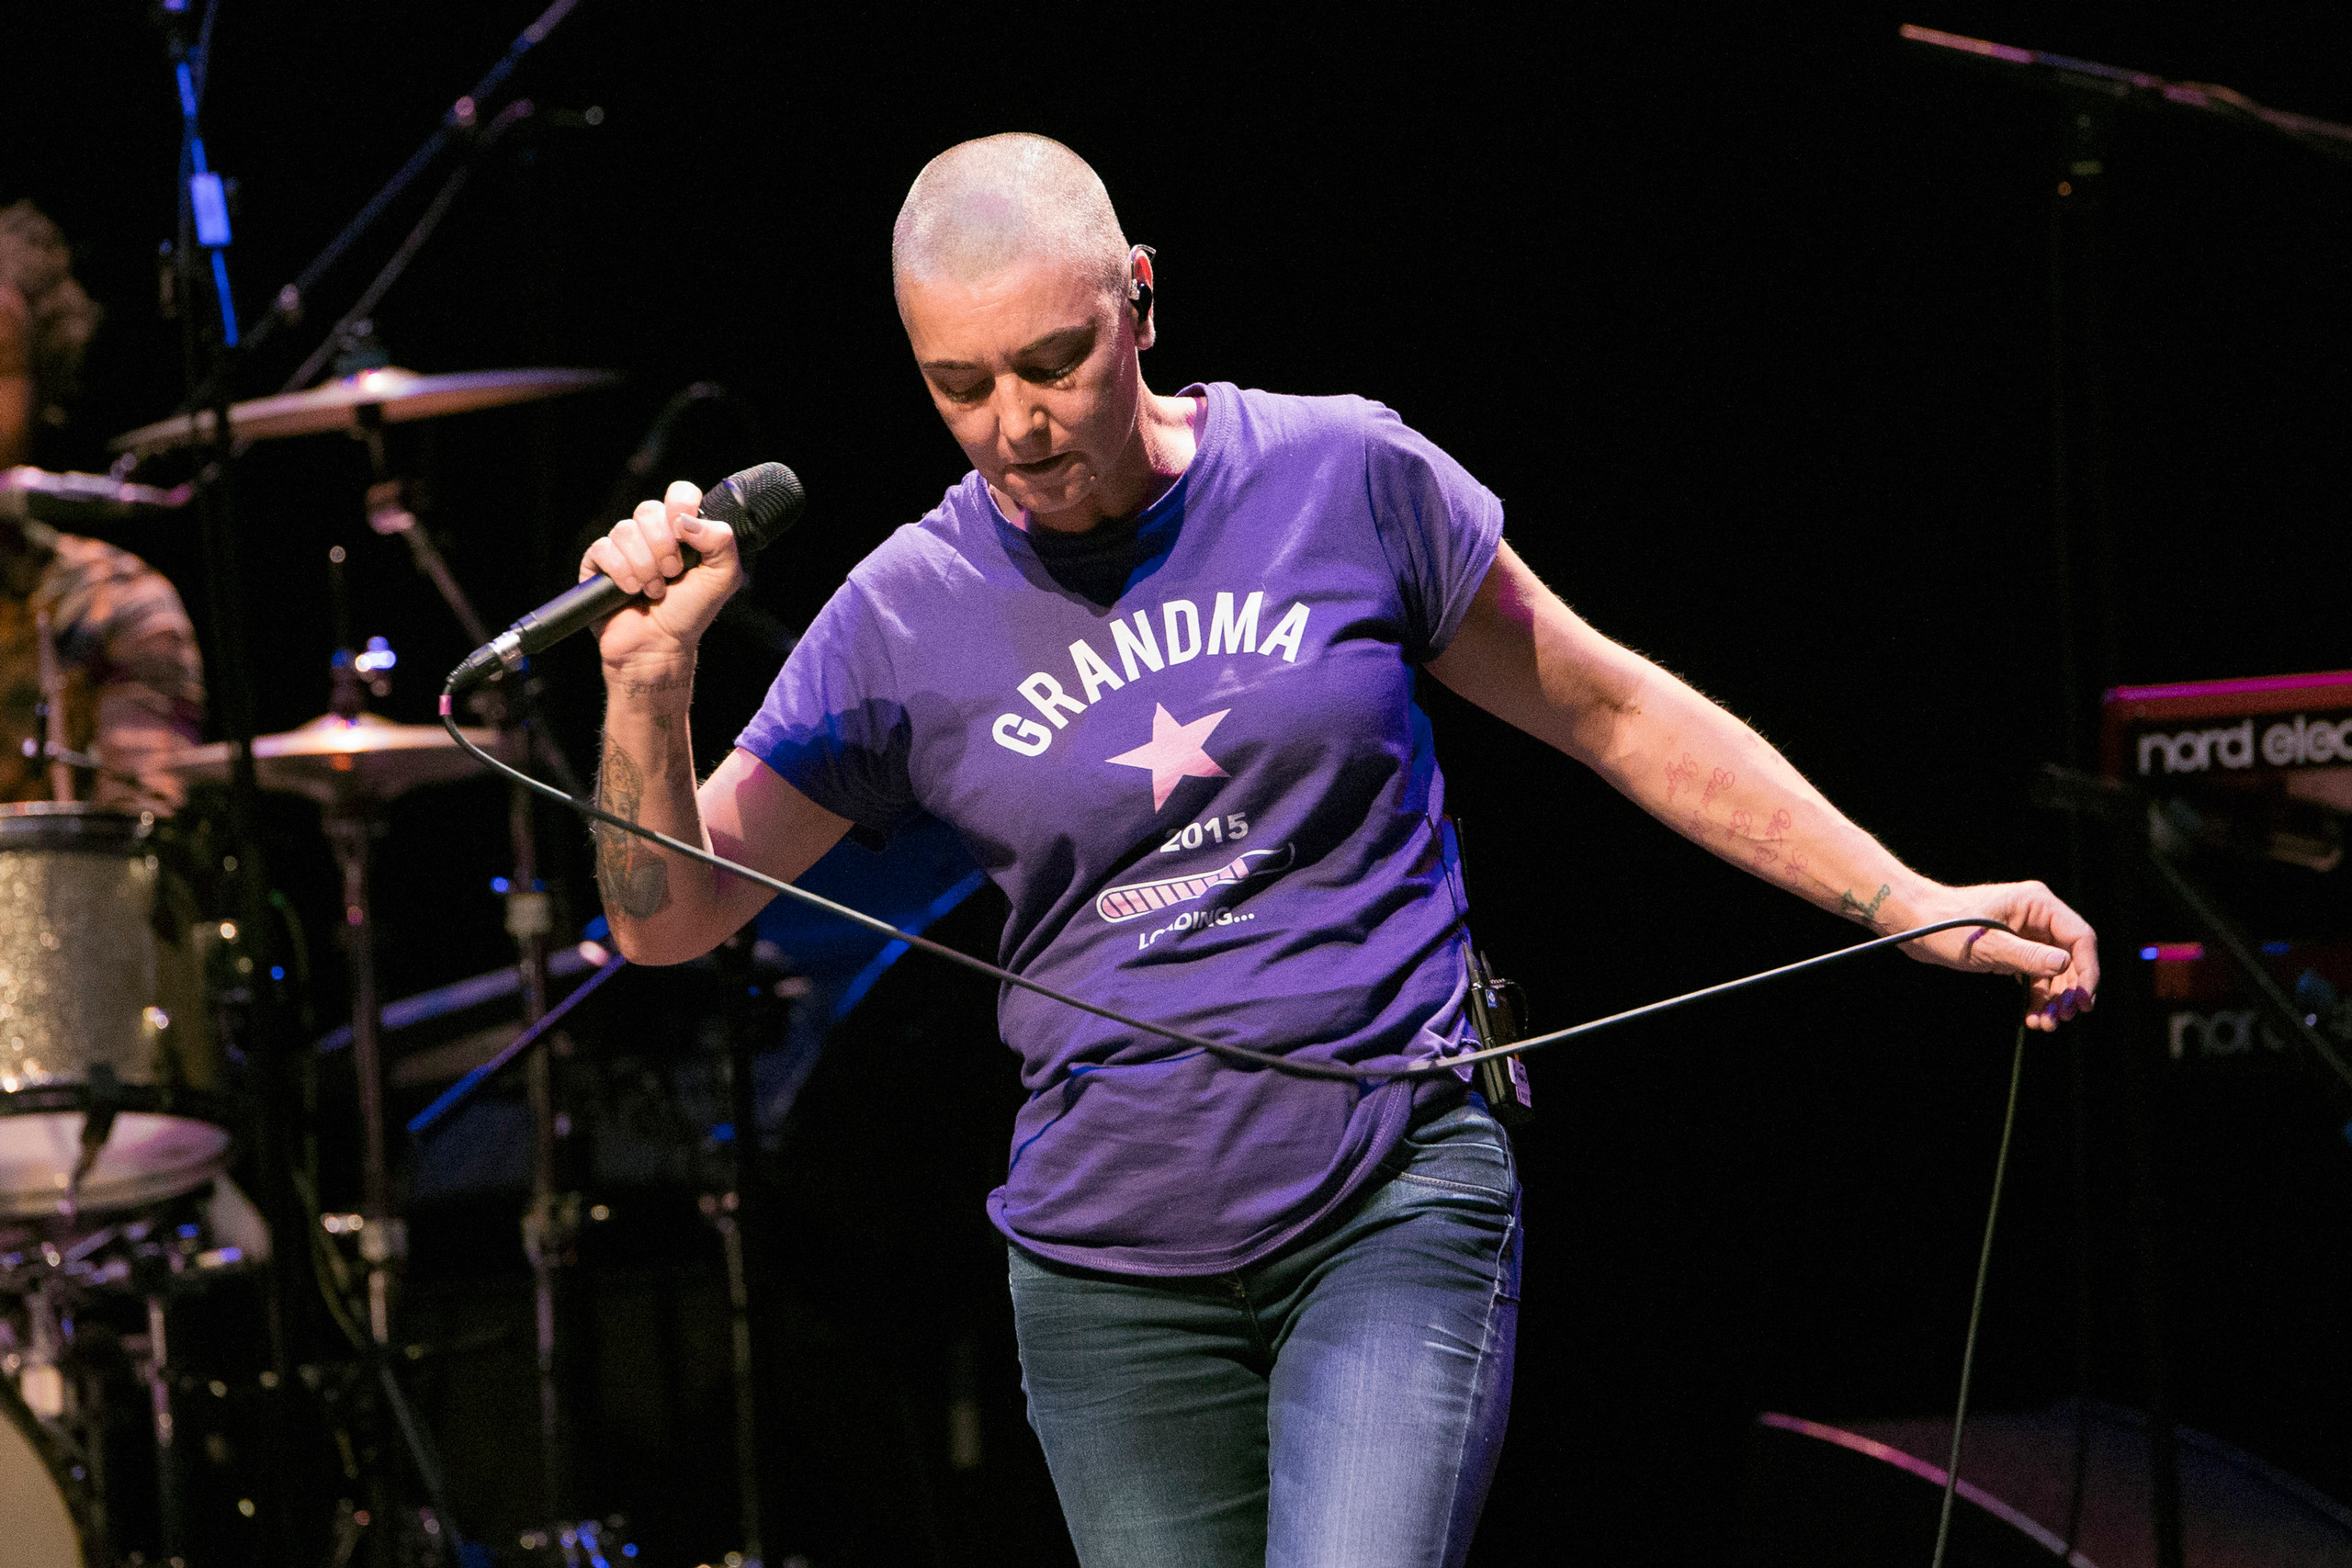 Sinead O'Connor performs on stage at Barbican Centre in London on Apr. 13, 2015. (Rob Ball—Redferns/Getty Images)